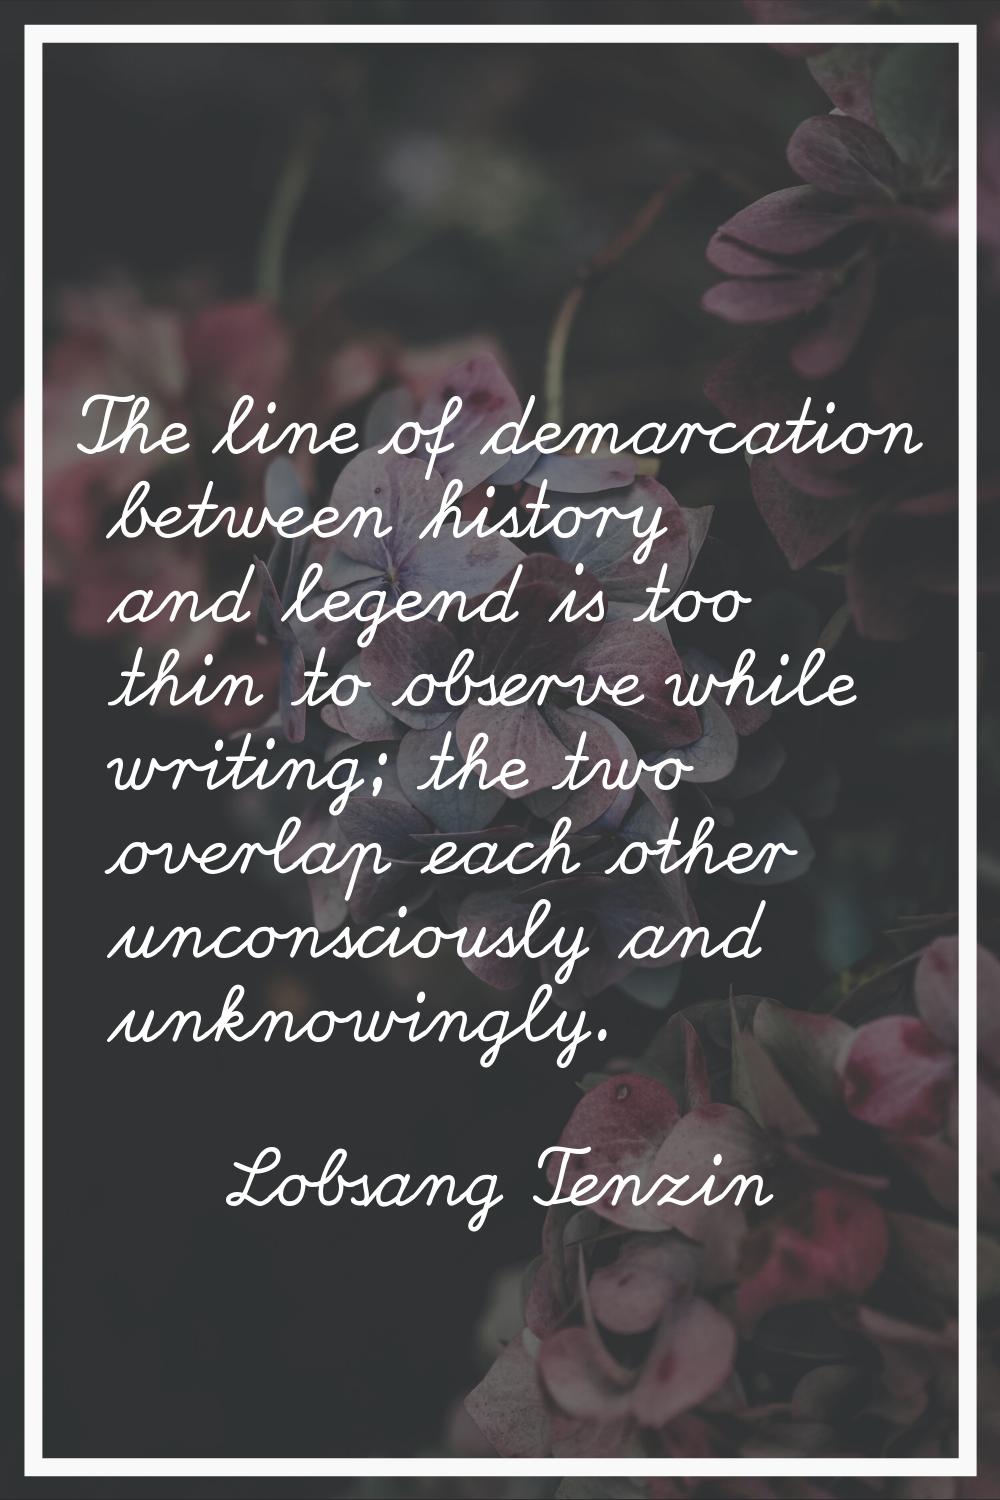 The line of demarcation between history and legend is too thin to observe while writing; the two ov